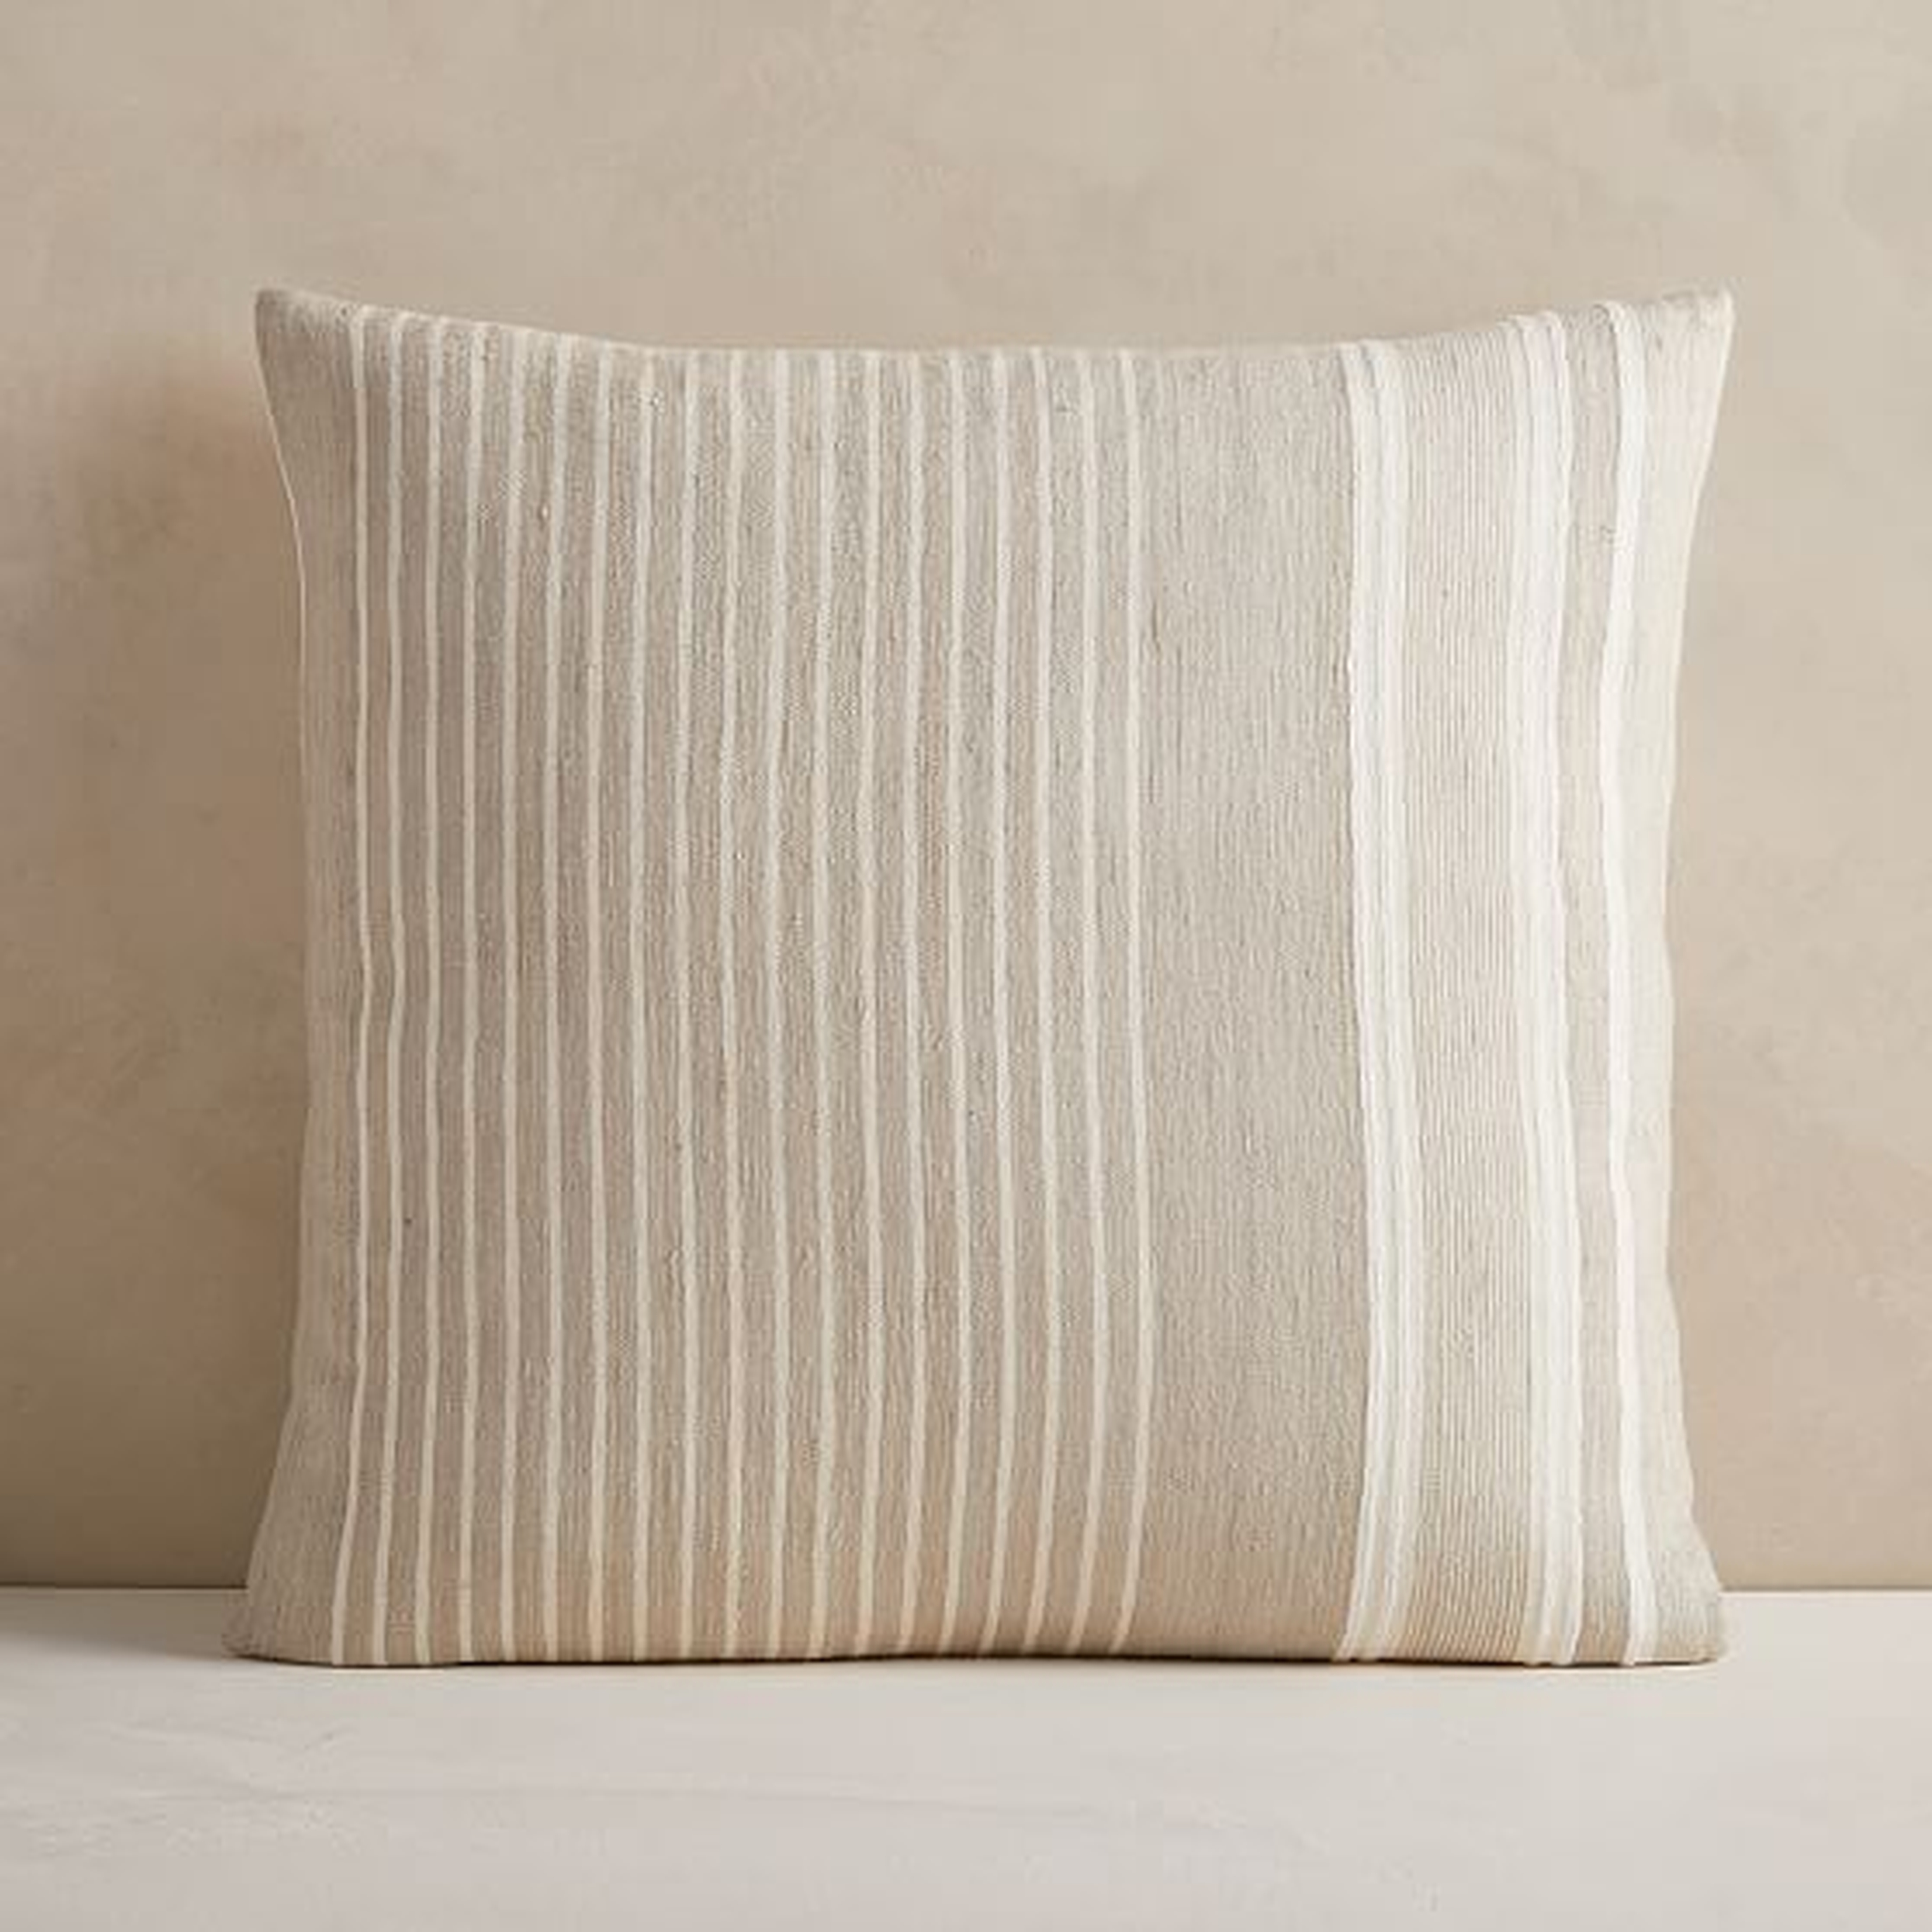 Silk Variegated Stripe Pillow Cover, 24"x24", Sand - West Elm